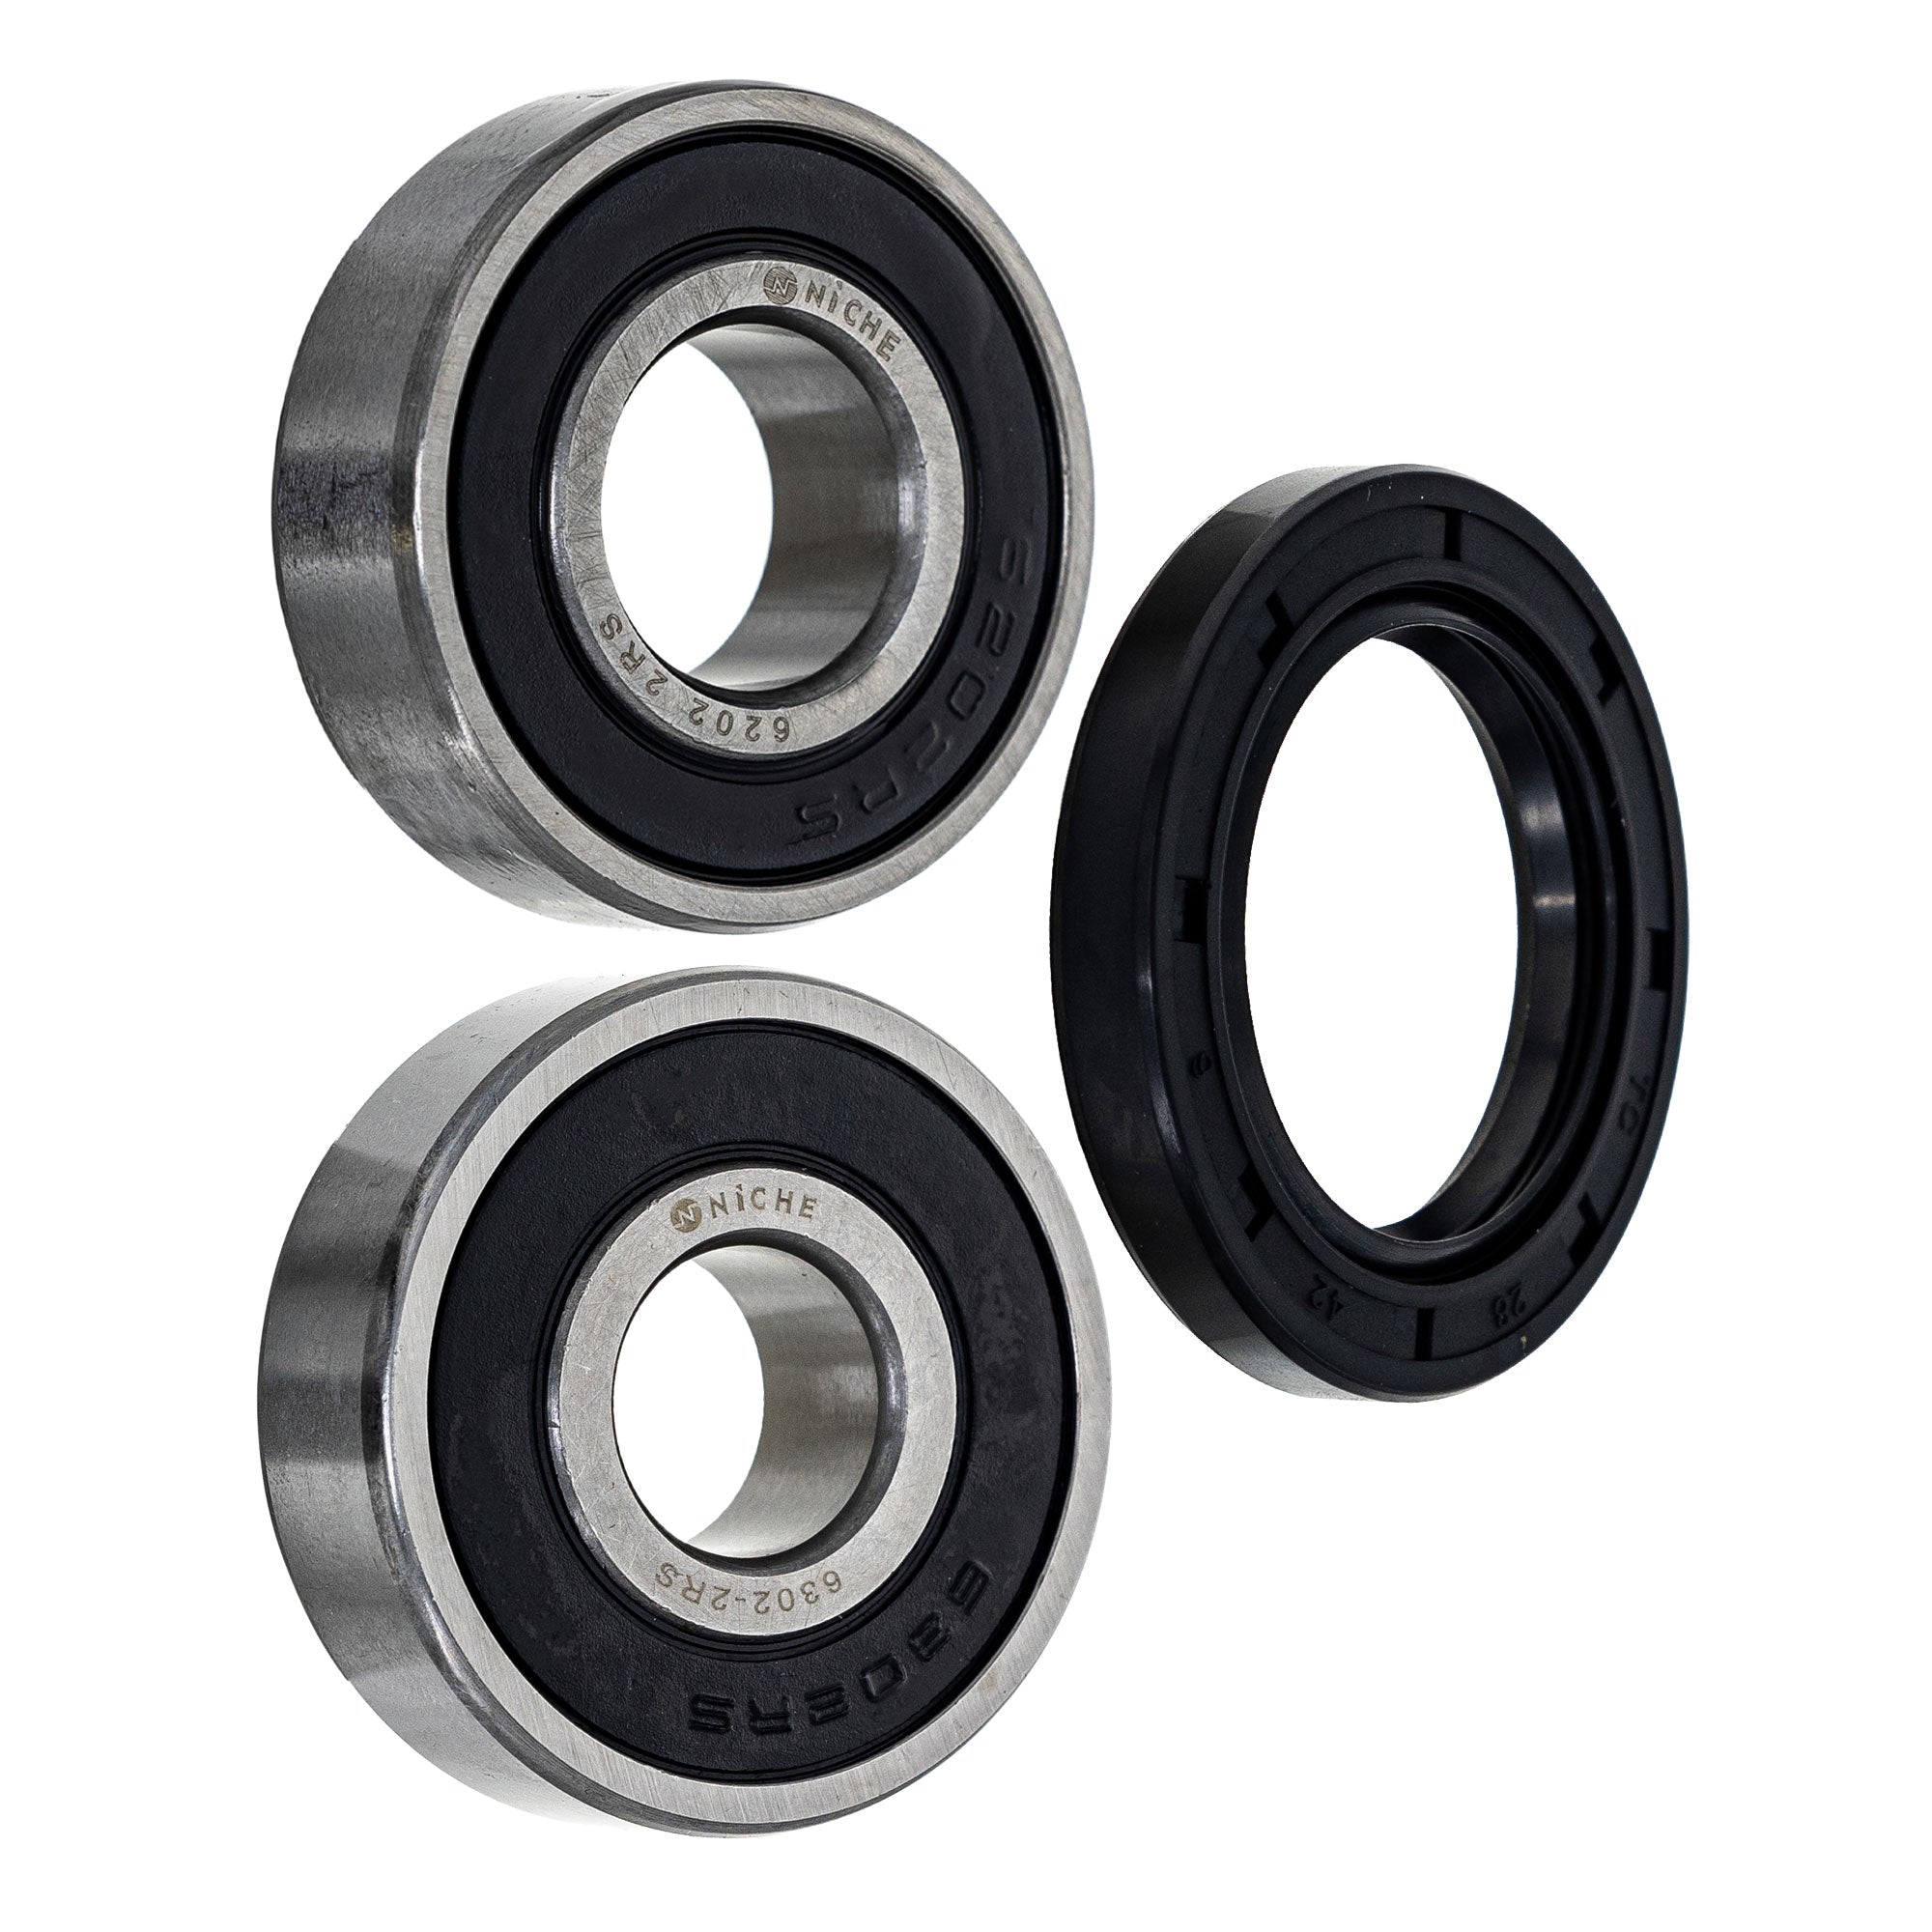 Wheel Bearing Seal Kit for zOTHER Ref No CB125S NICHE MK1008978